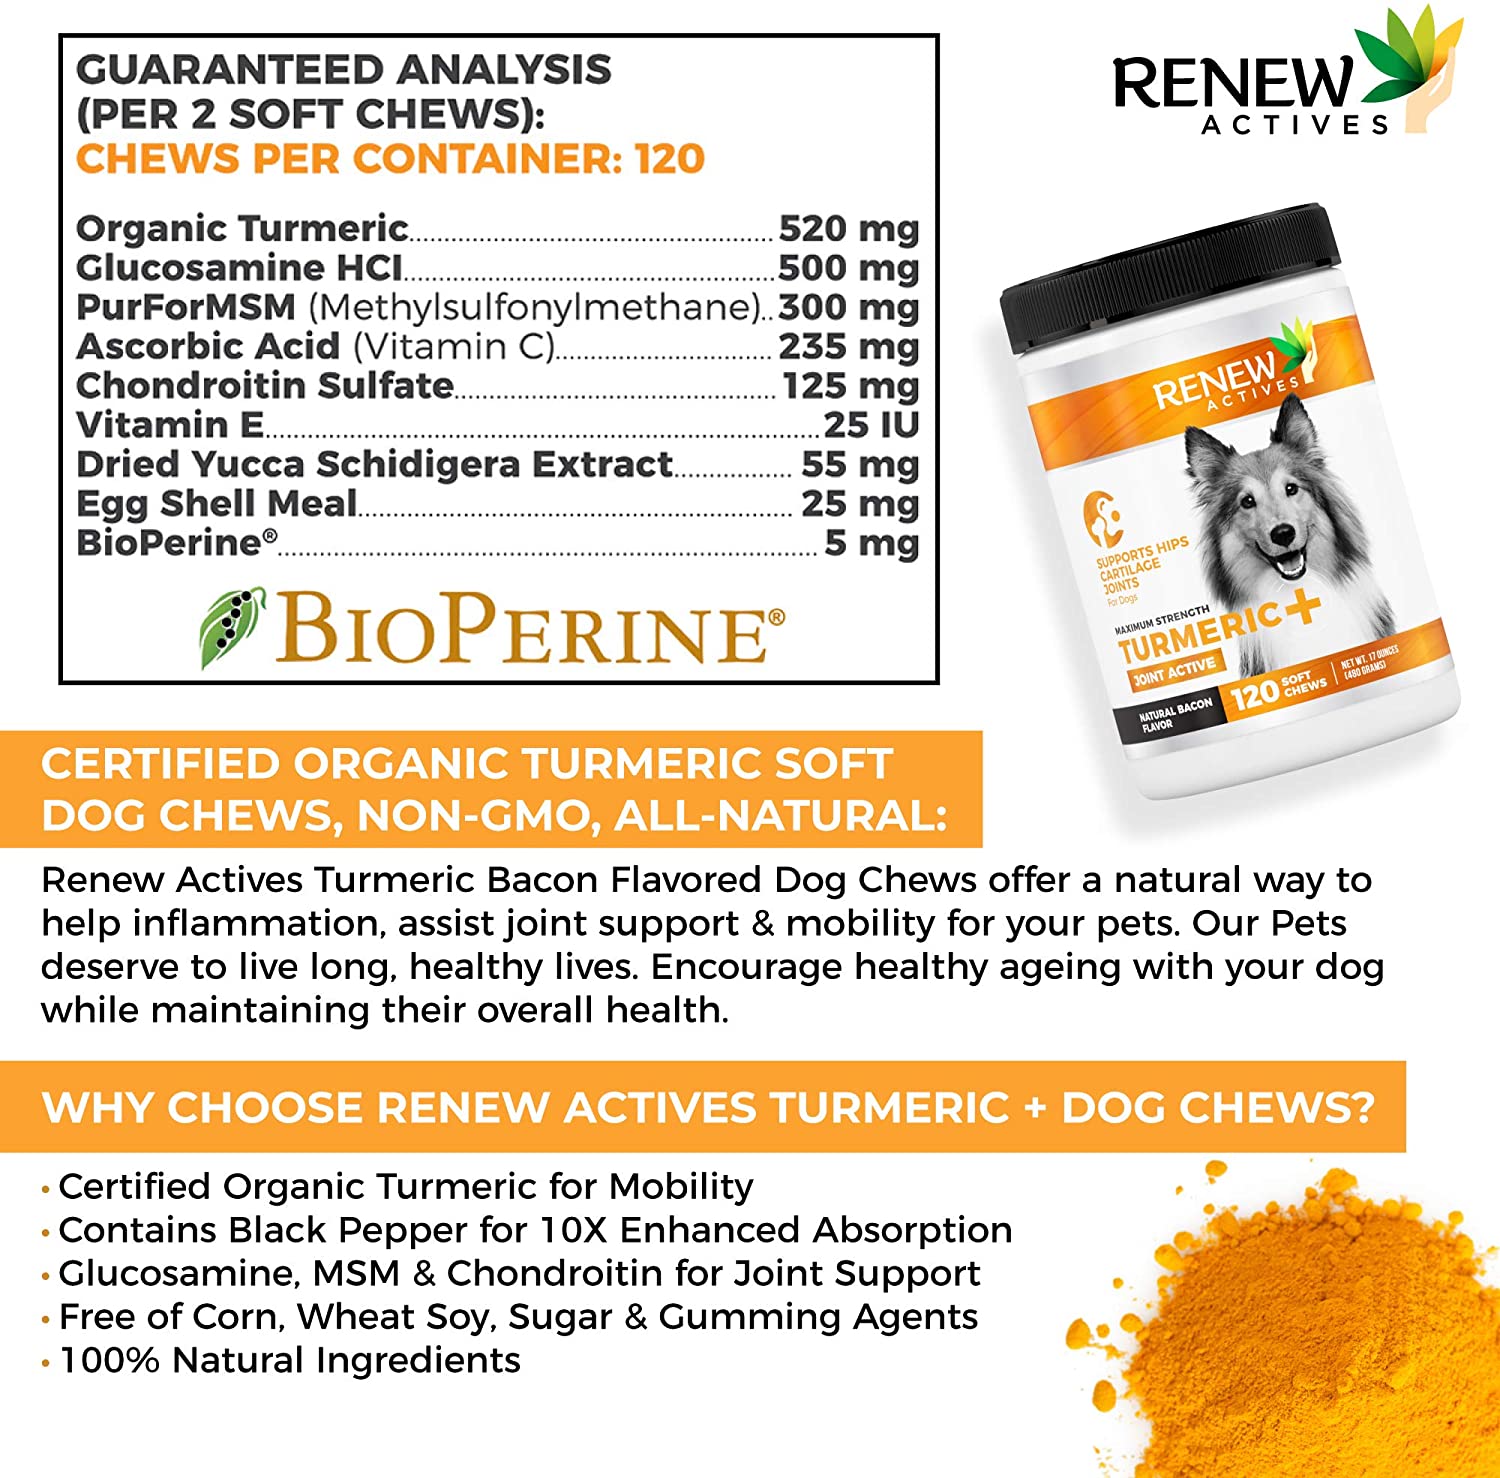 Organic Turmeric Joint Supplement for Dogs - 120 Soft Chews